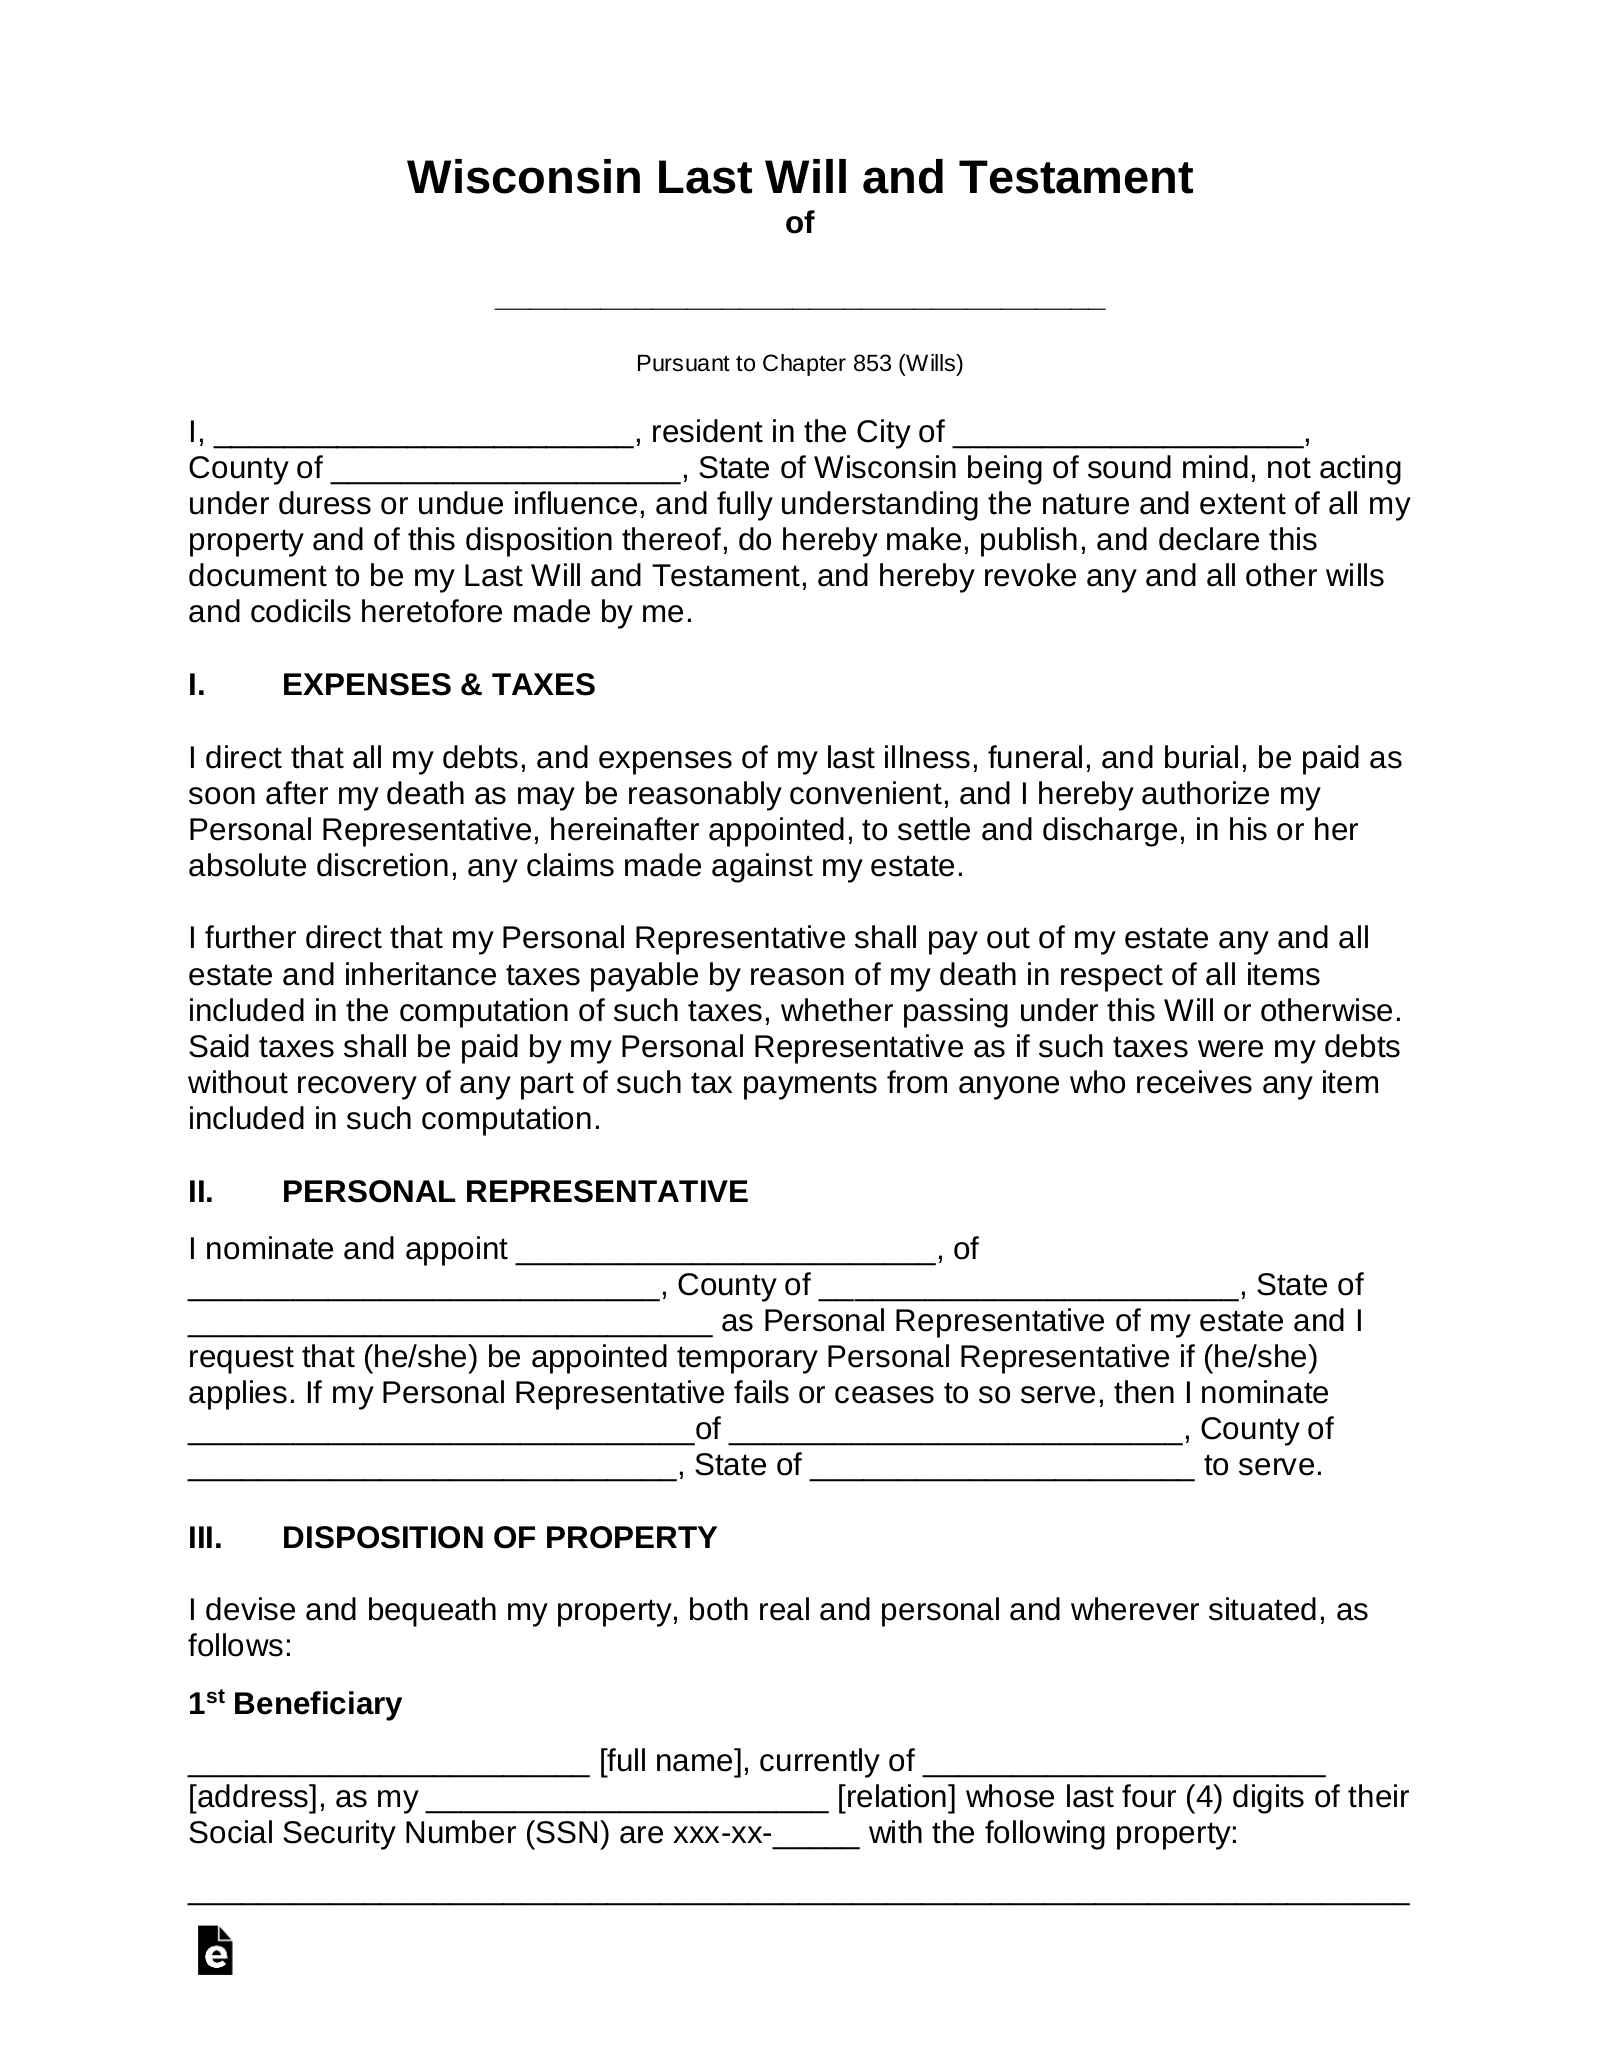 Wisconsin Last Will and Testament Template